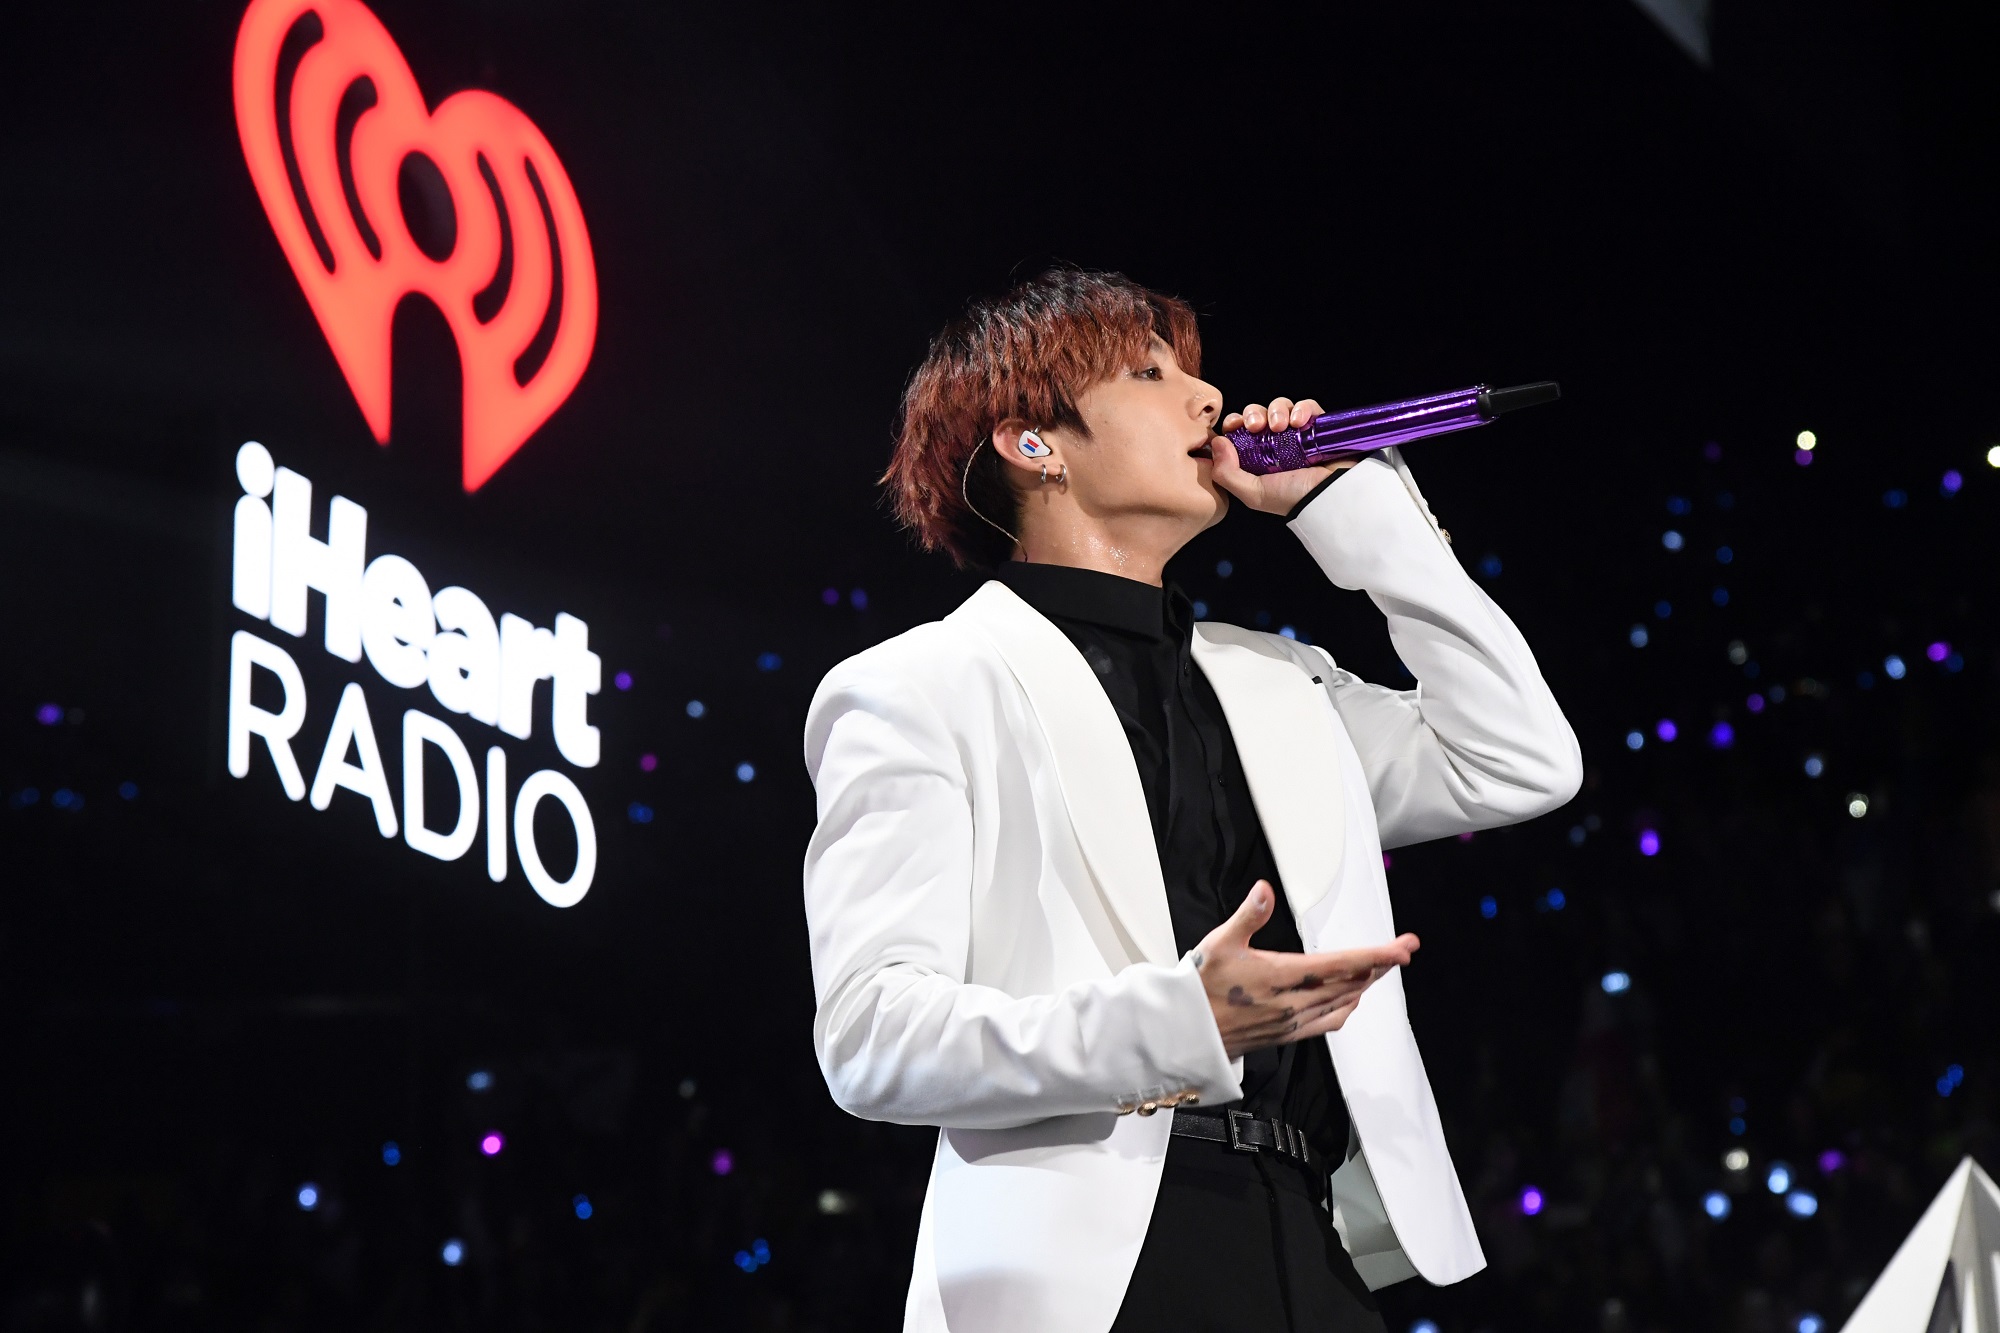 Jungkook of BTS performs during during 102.7 KIIS FM's Jingle Ball 2019